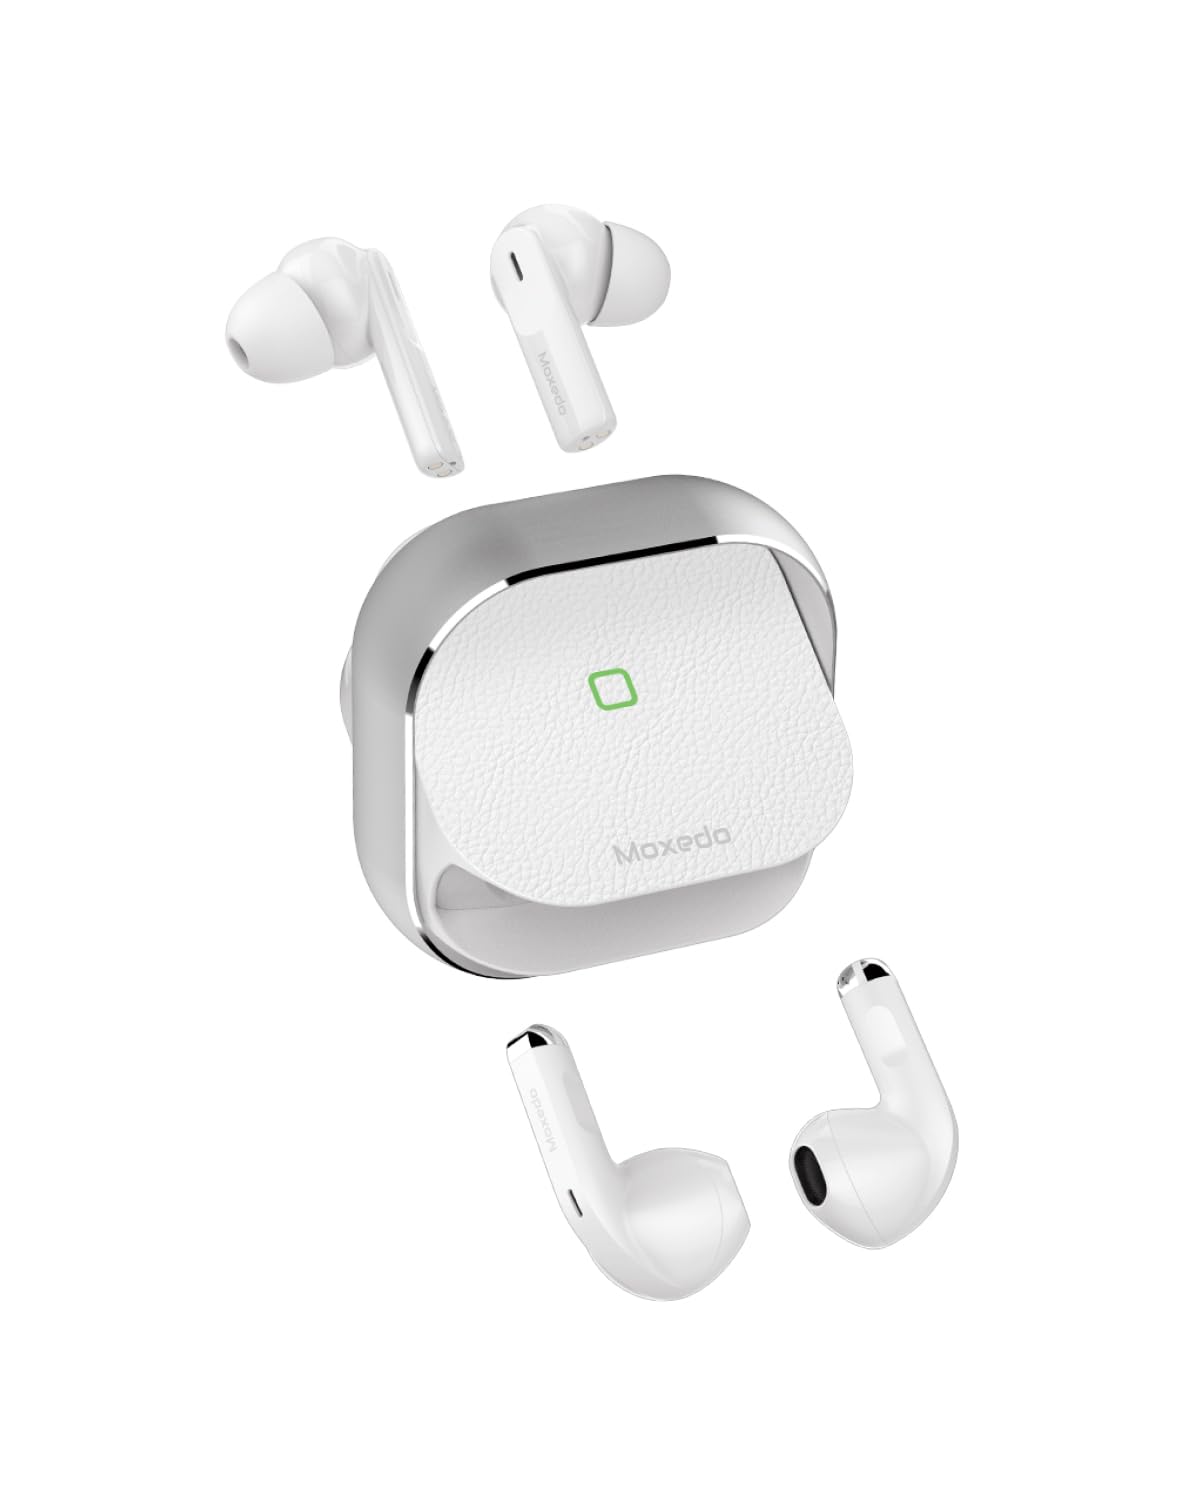 Moxedo Duo Beats 2 in 1 Wireless Bluetooth 5.3 Earbuds Dual Microphone Clear Calls, IPX4 Sweat Resistance Easy Touch Control, ENC Noise Reduction Technology - Silver